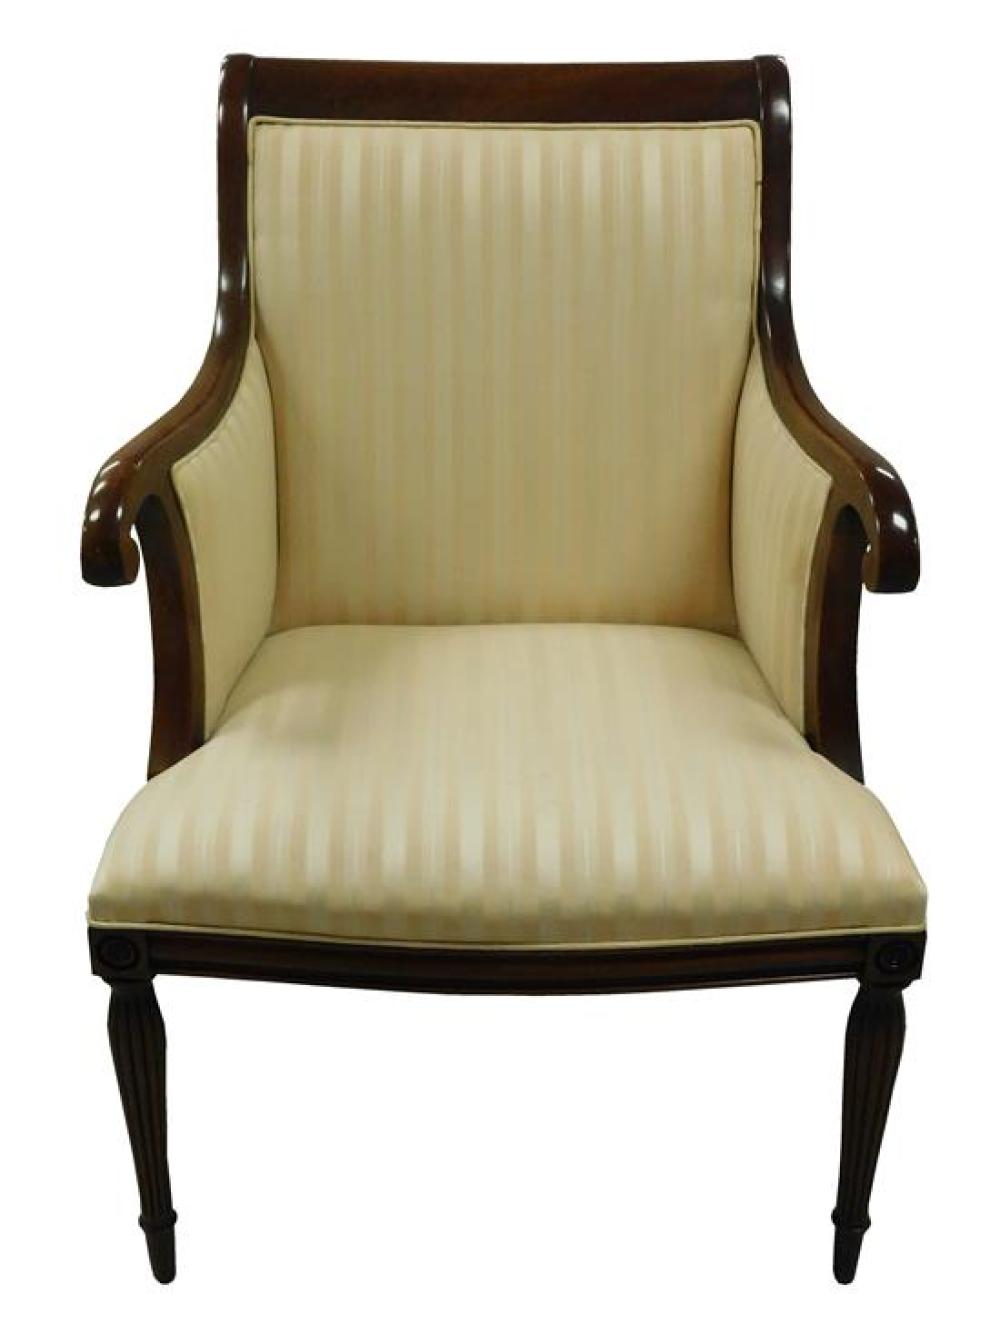 EMPIRE STYLE CHAIR WITH ROLLED 31bdca